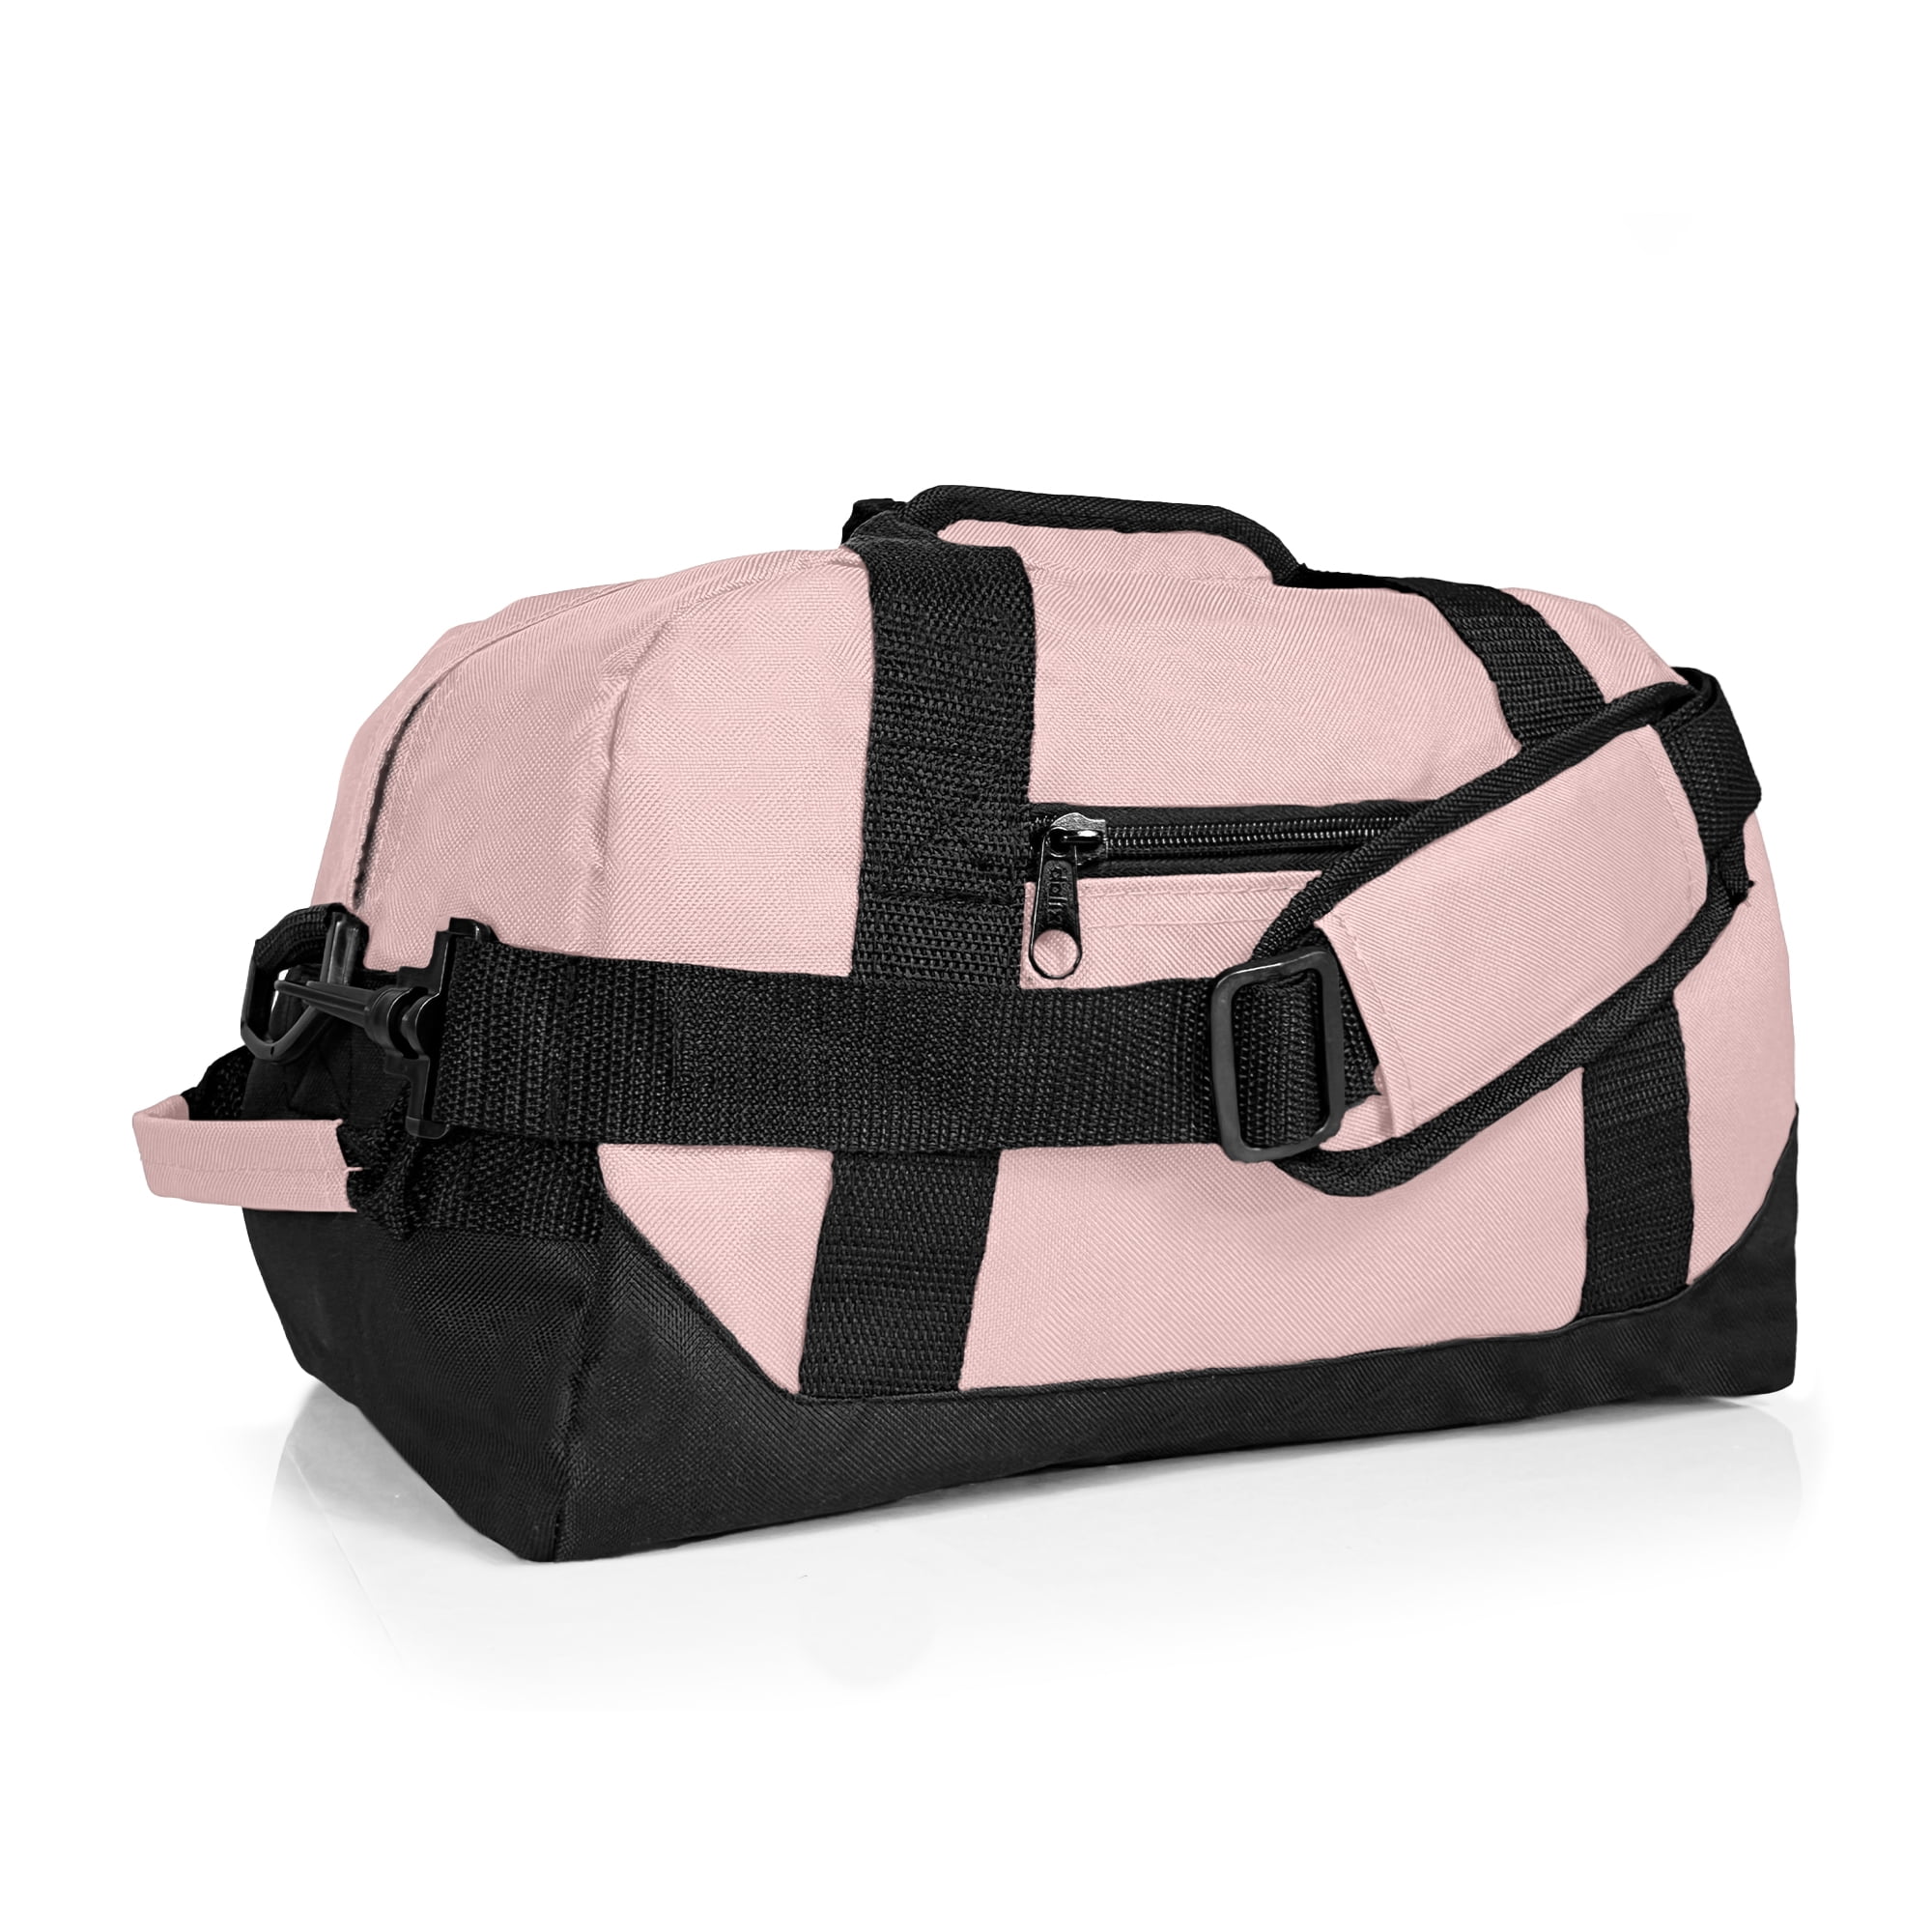 DALIX 14 Small Duffel Bag Gym Duffle Two Tone in Pink with Shoulder Strap